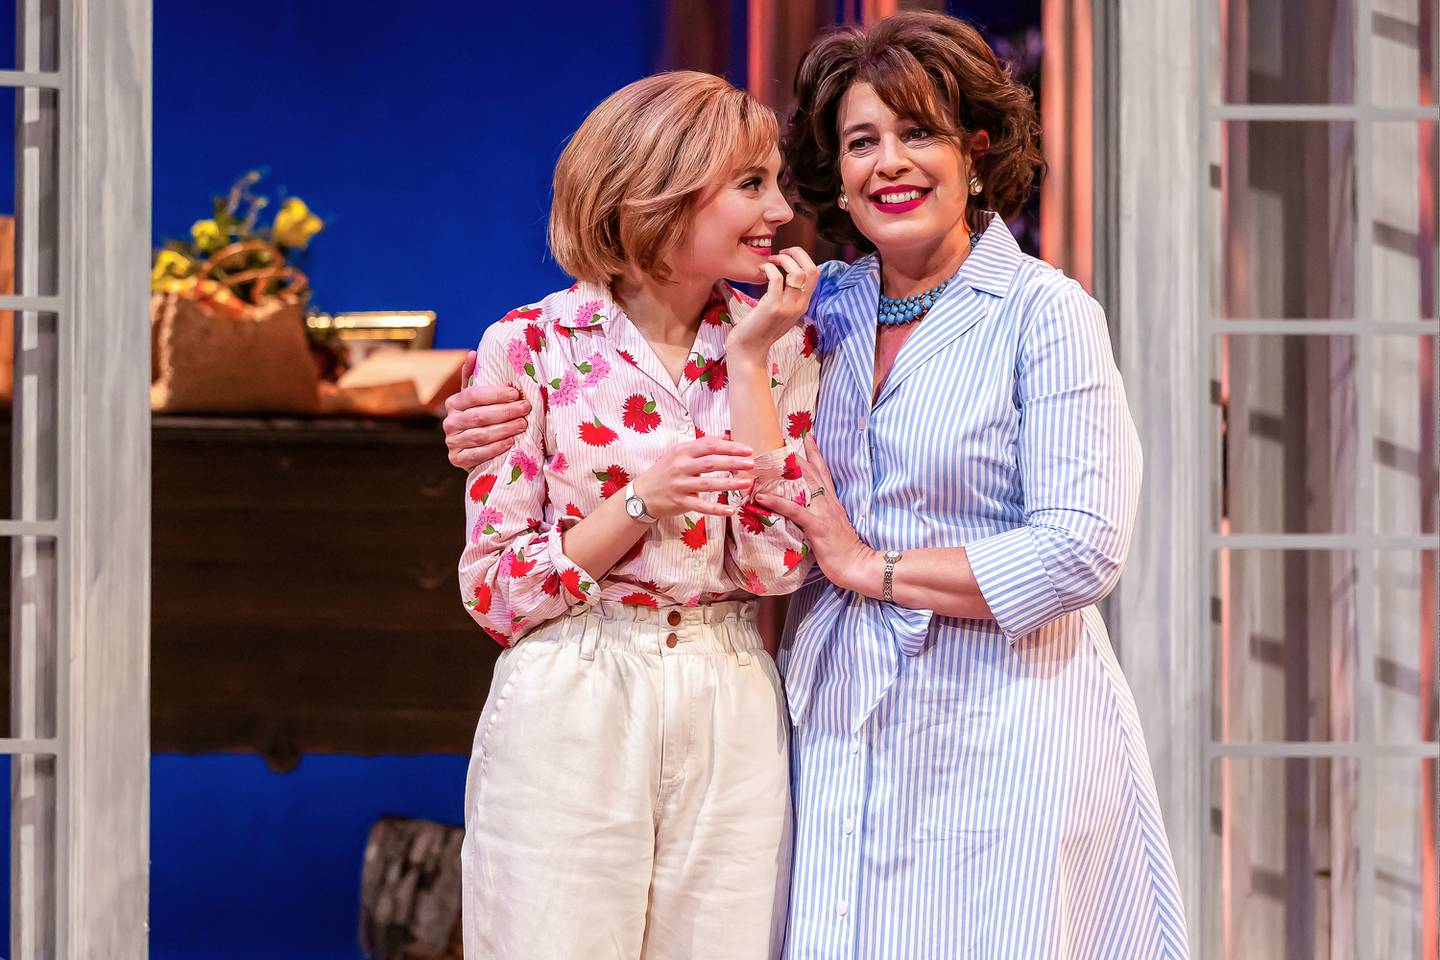 Cordelia Dewdney (from left) portrays Shelby, and Amy J. Carle her mother, M'Lynn, in "Steel Magnolias" at Drury Lane Theatre in Oakbrook Terrace.